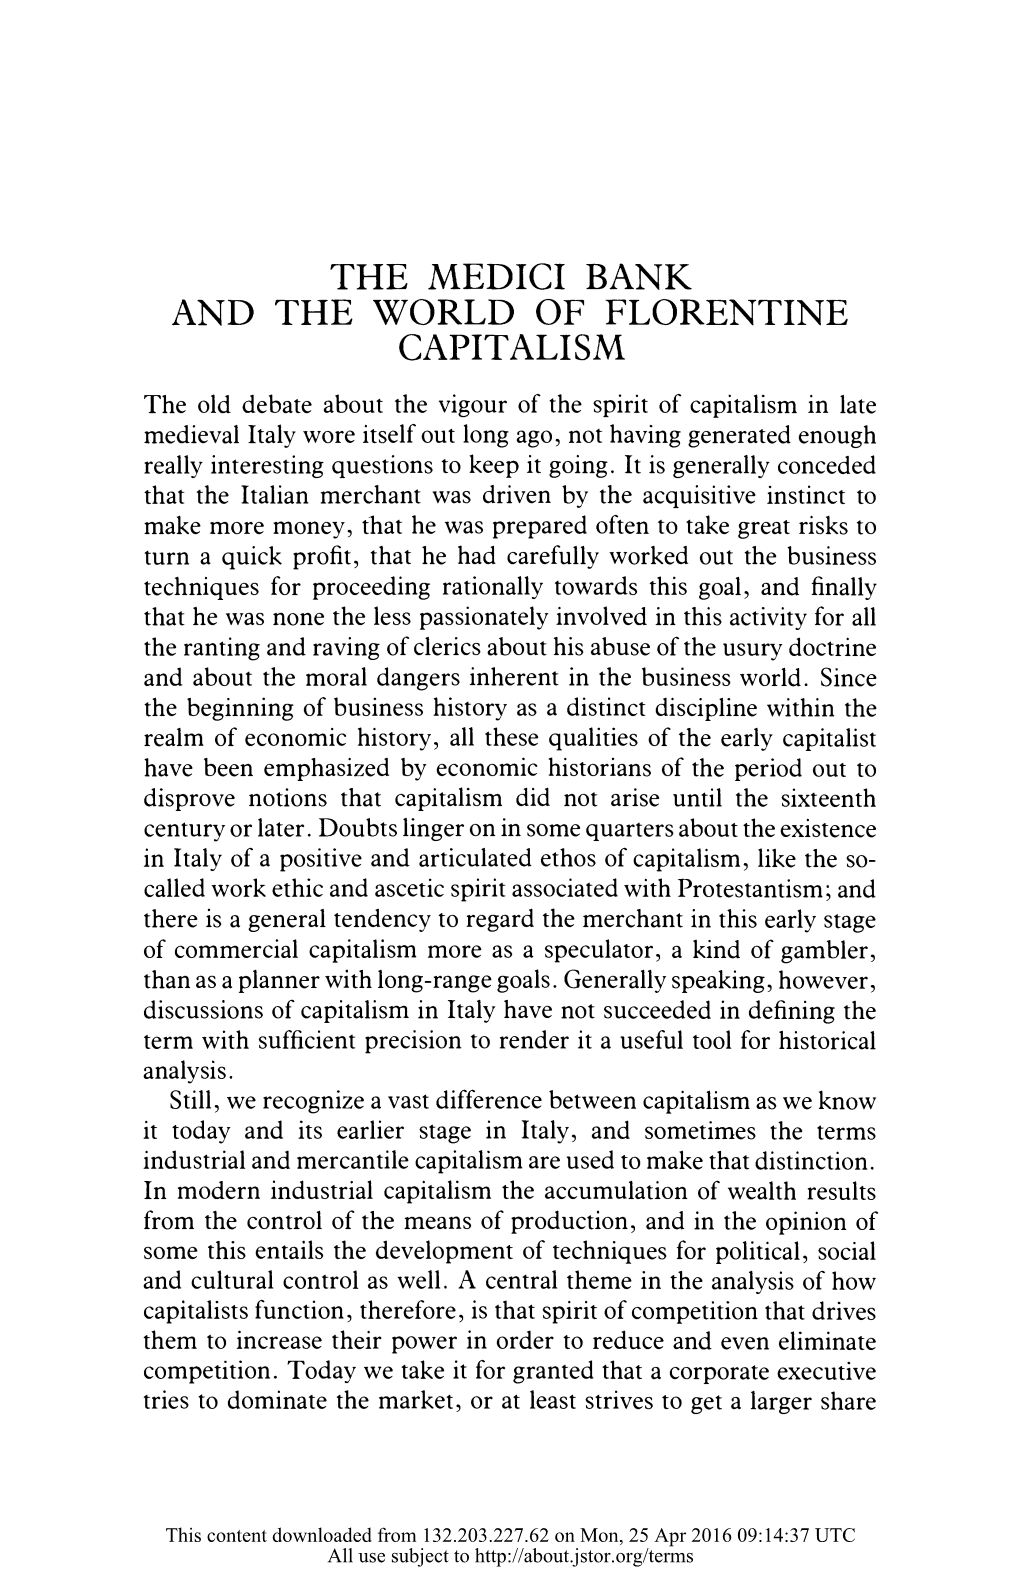 The Medici Bank and the World of Florentine Capitalism